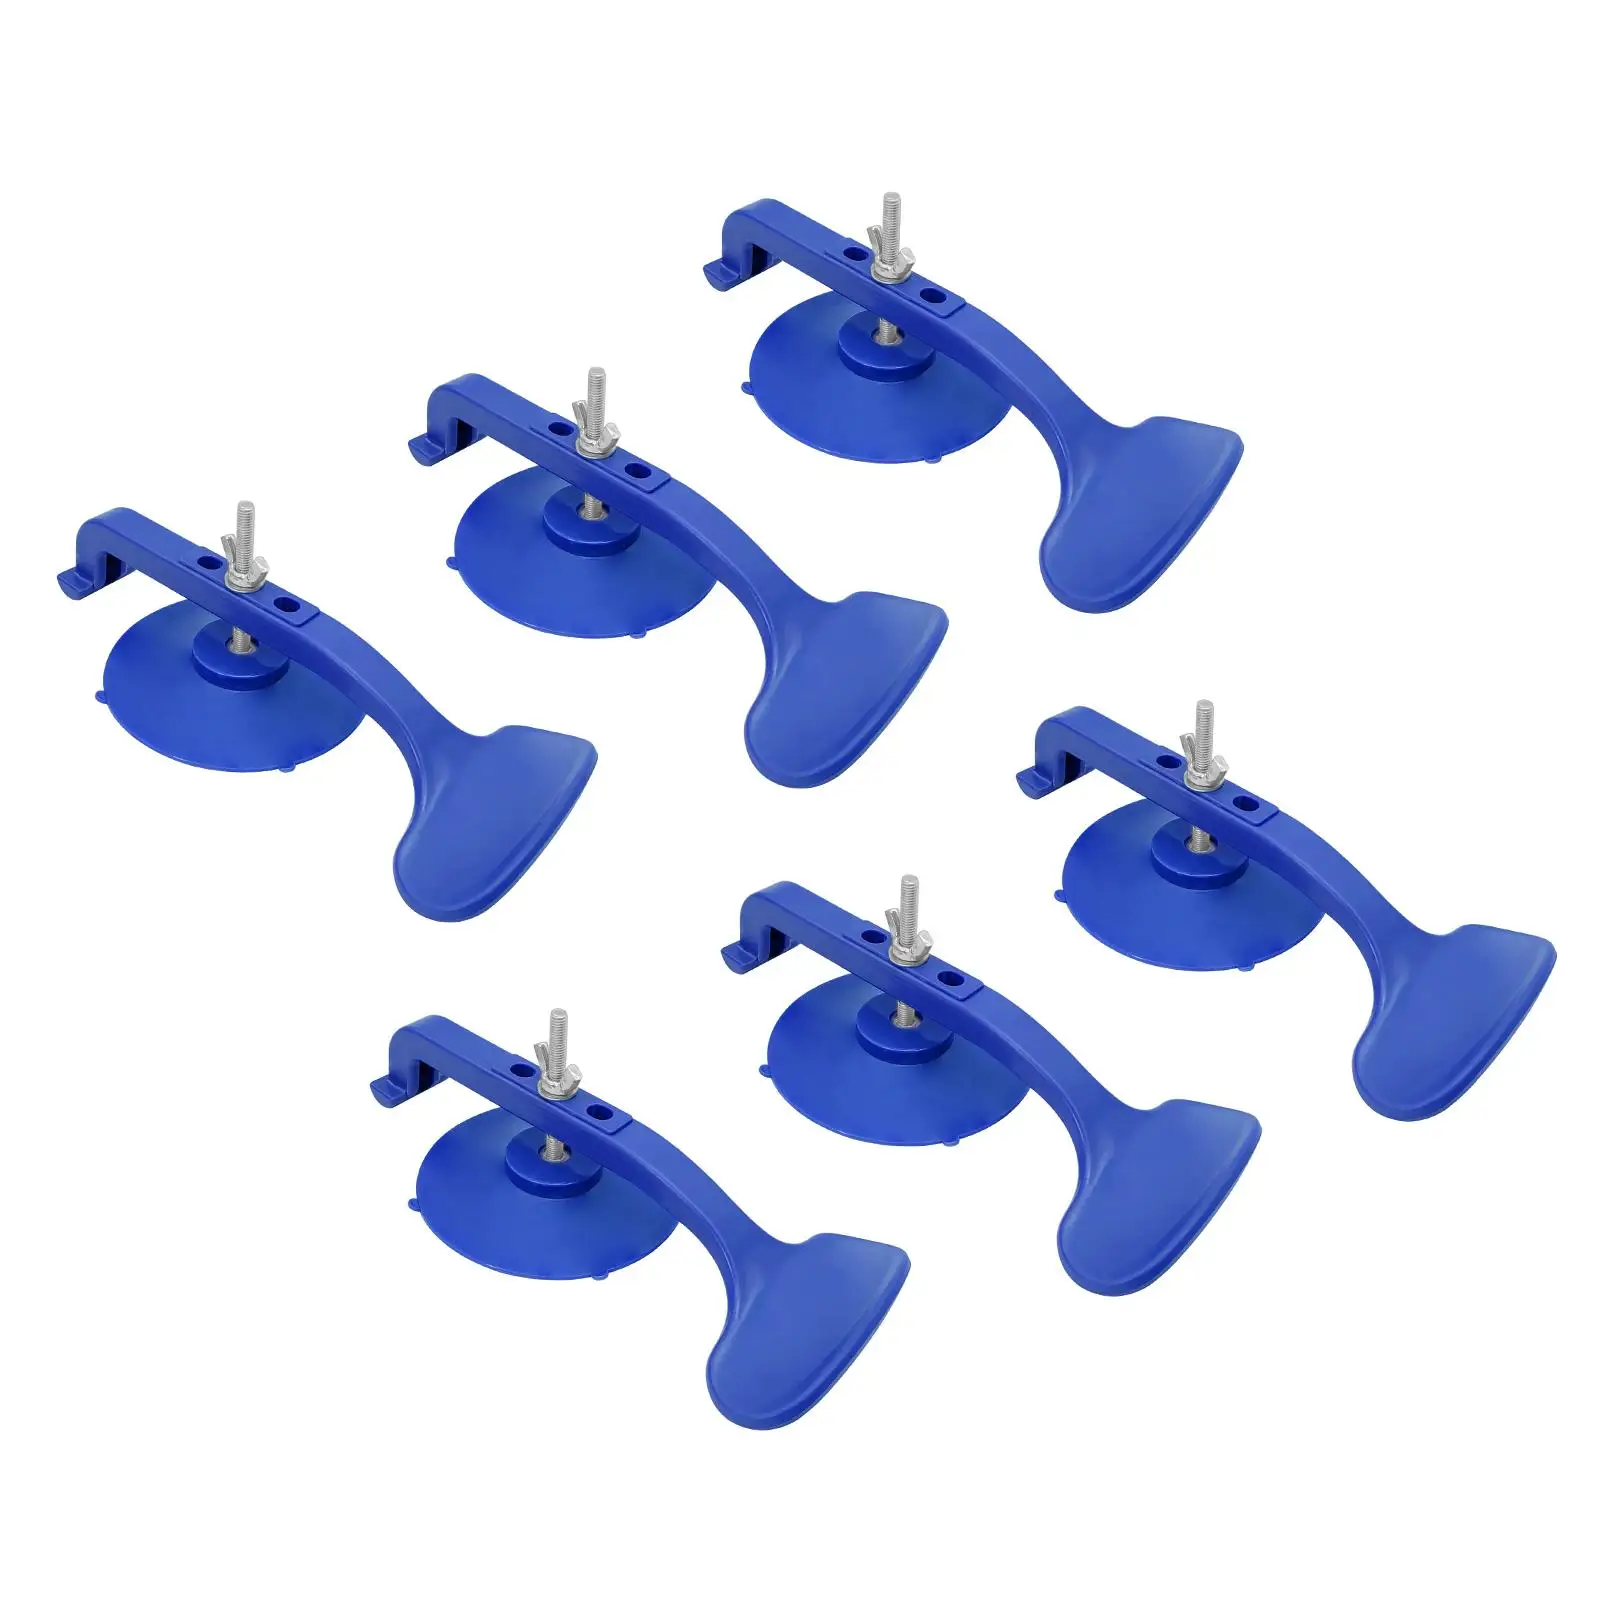 6 Pieces Practical Suction Clamp Set Adjustable for Convertible Glass Windshield Repair Blue Automotive or Home Repairs